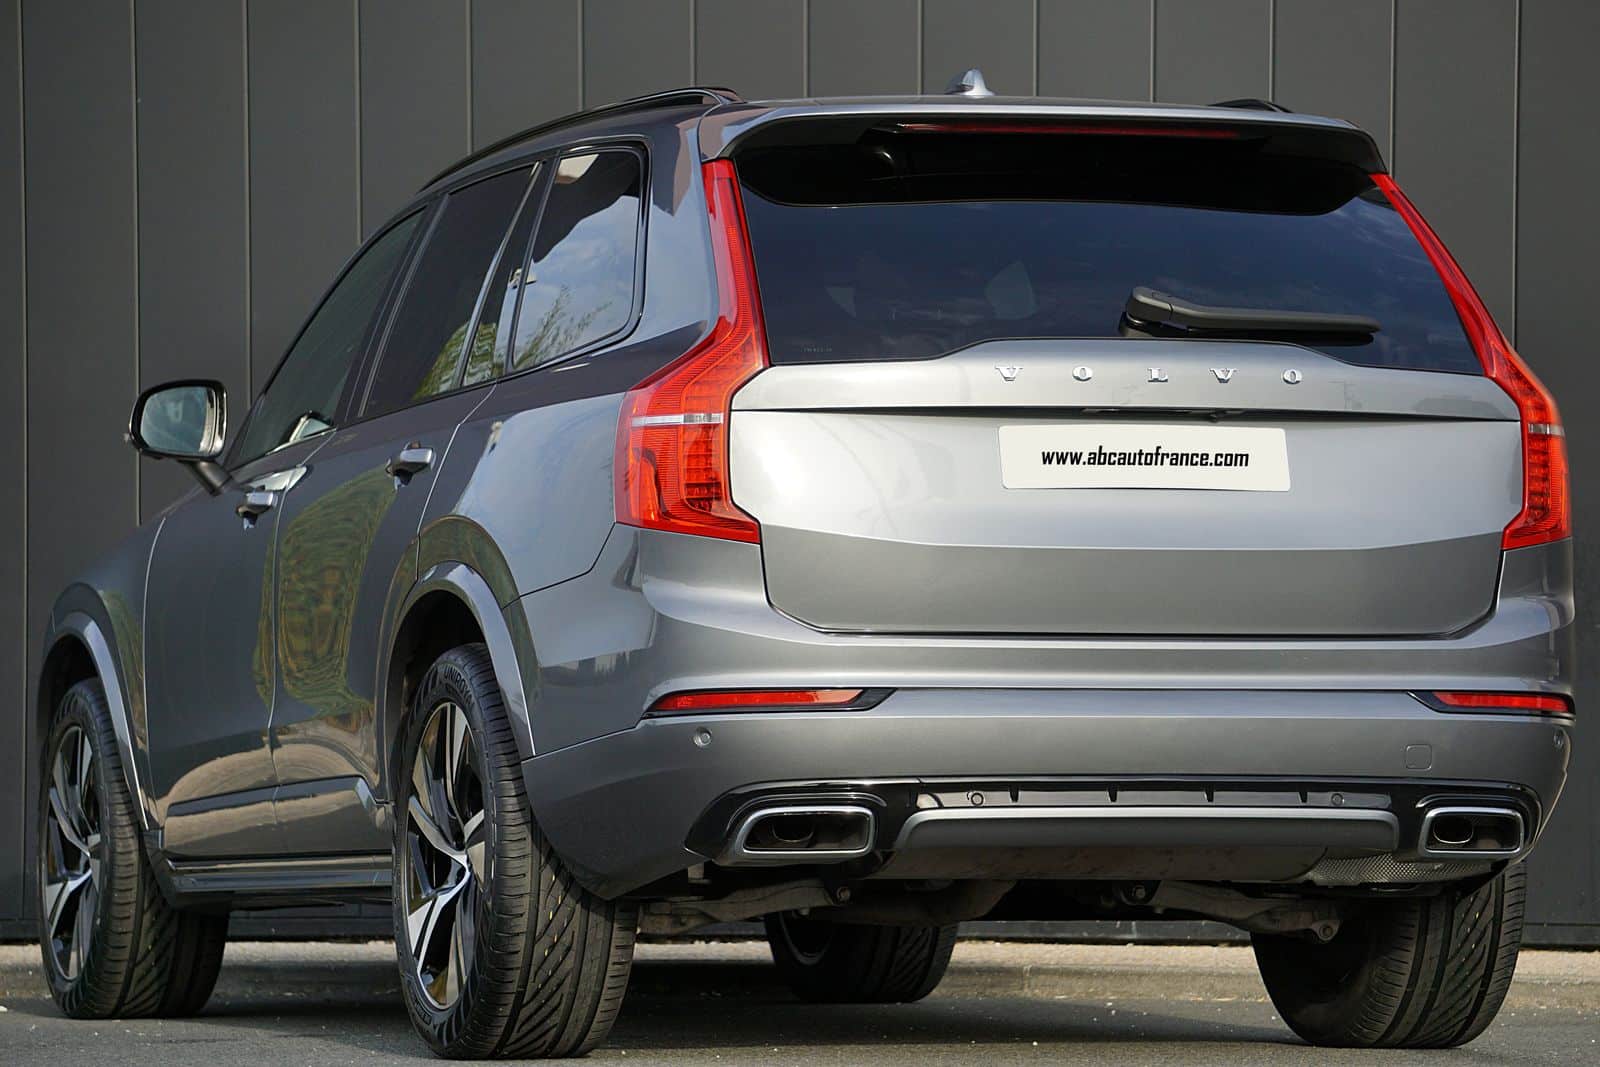 VOLVO XC90 (II) Phase II B5 AWD 235 CV R-Design Geartronic 5 places Occasion 79 abcautofrance (abc auto france) 5